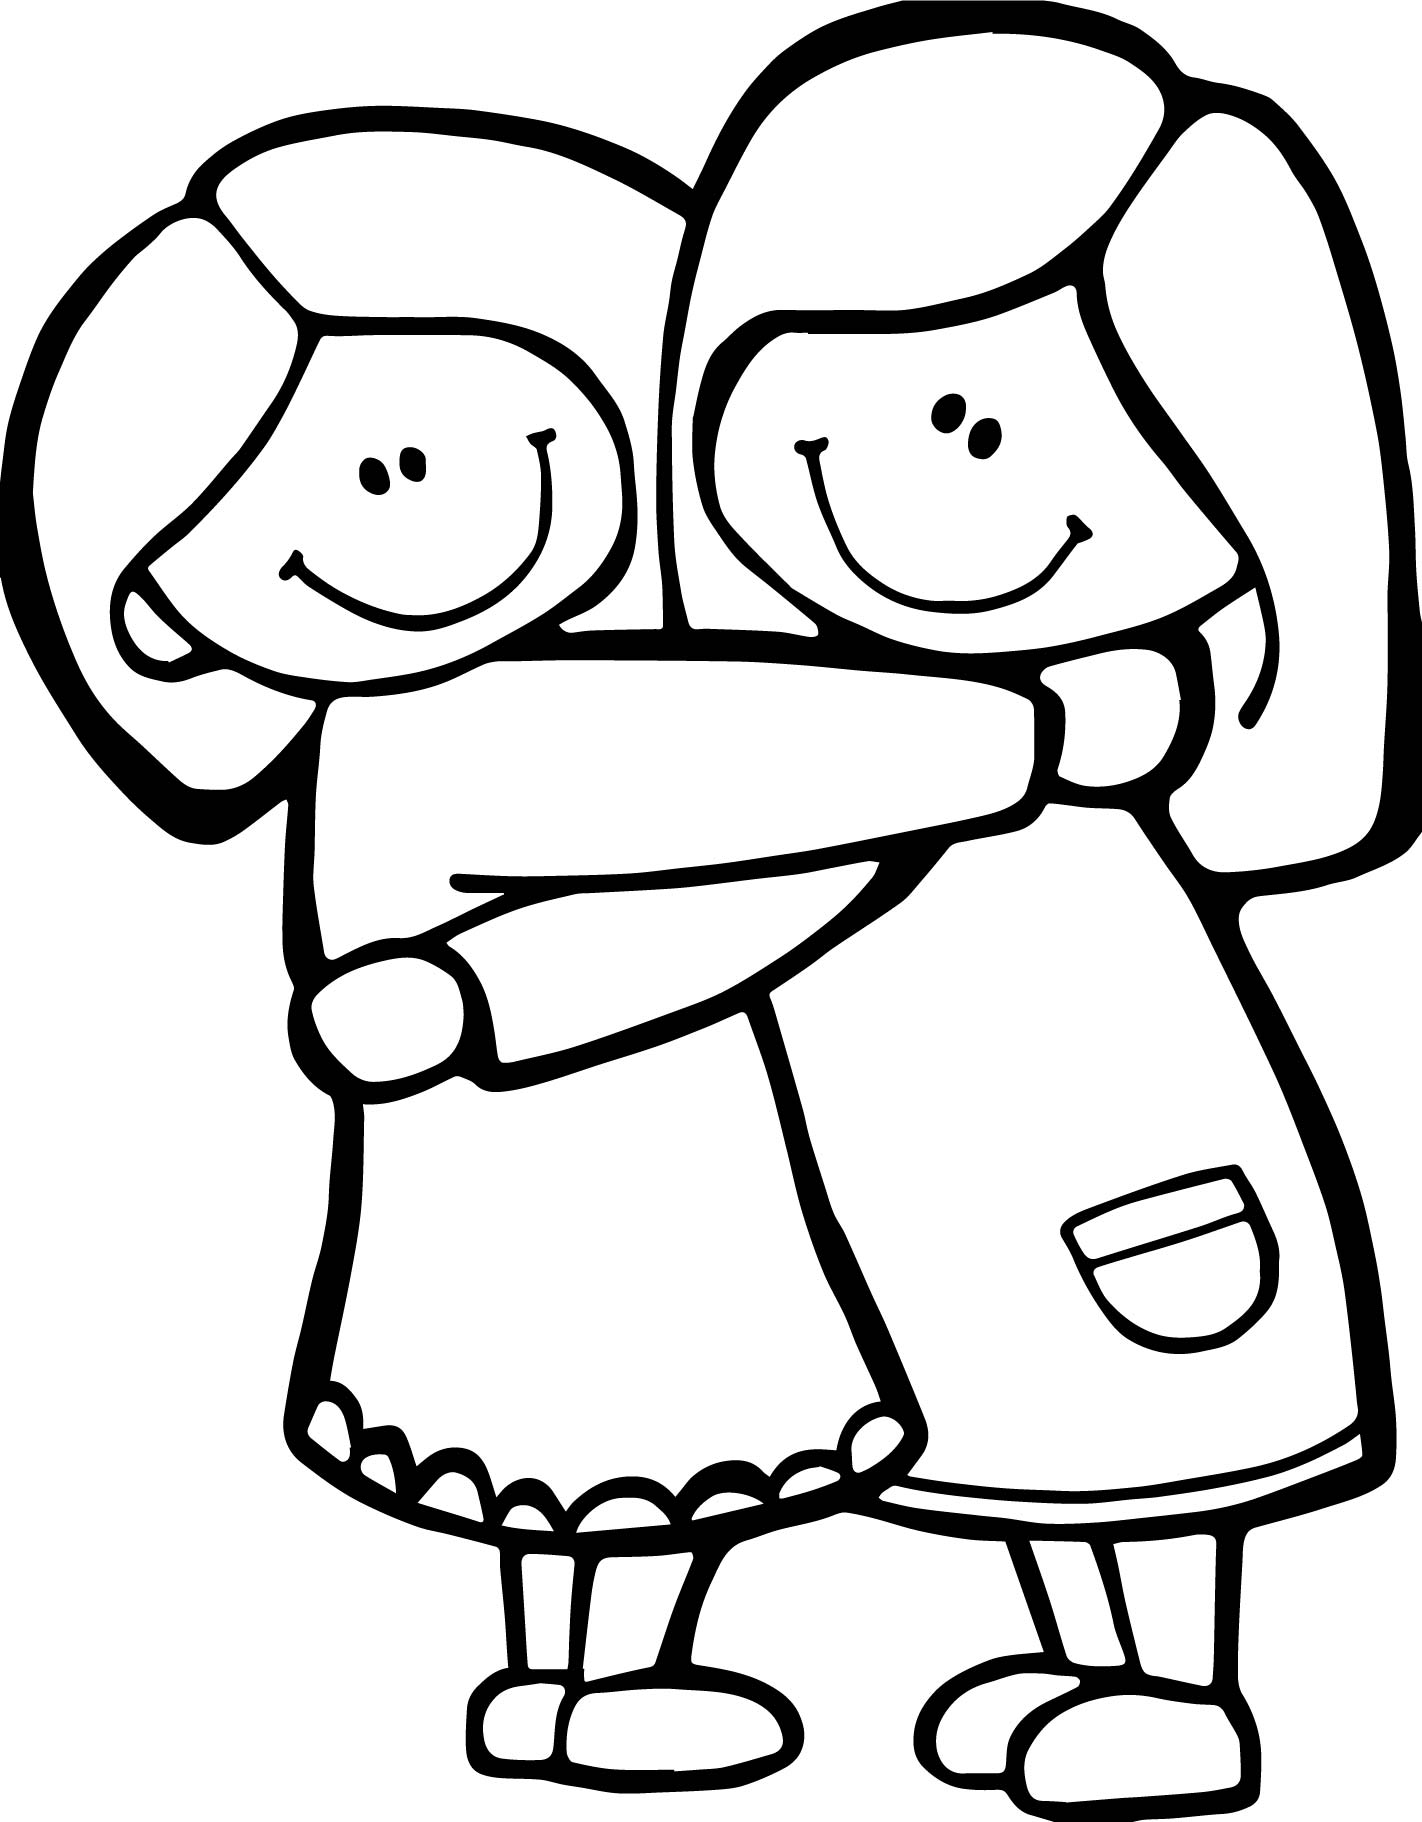 Two Girls Coloring Pages at GetDrawings Free download